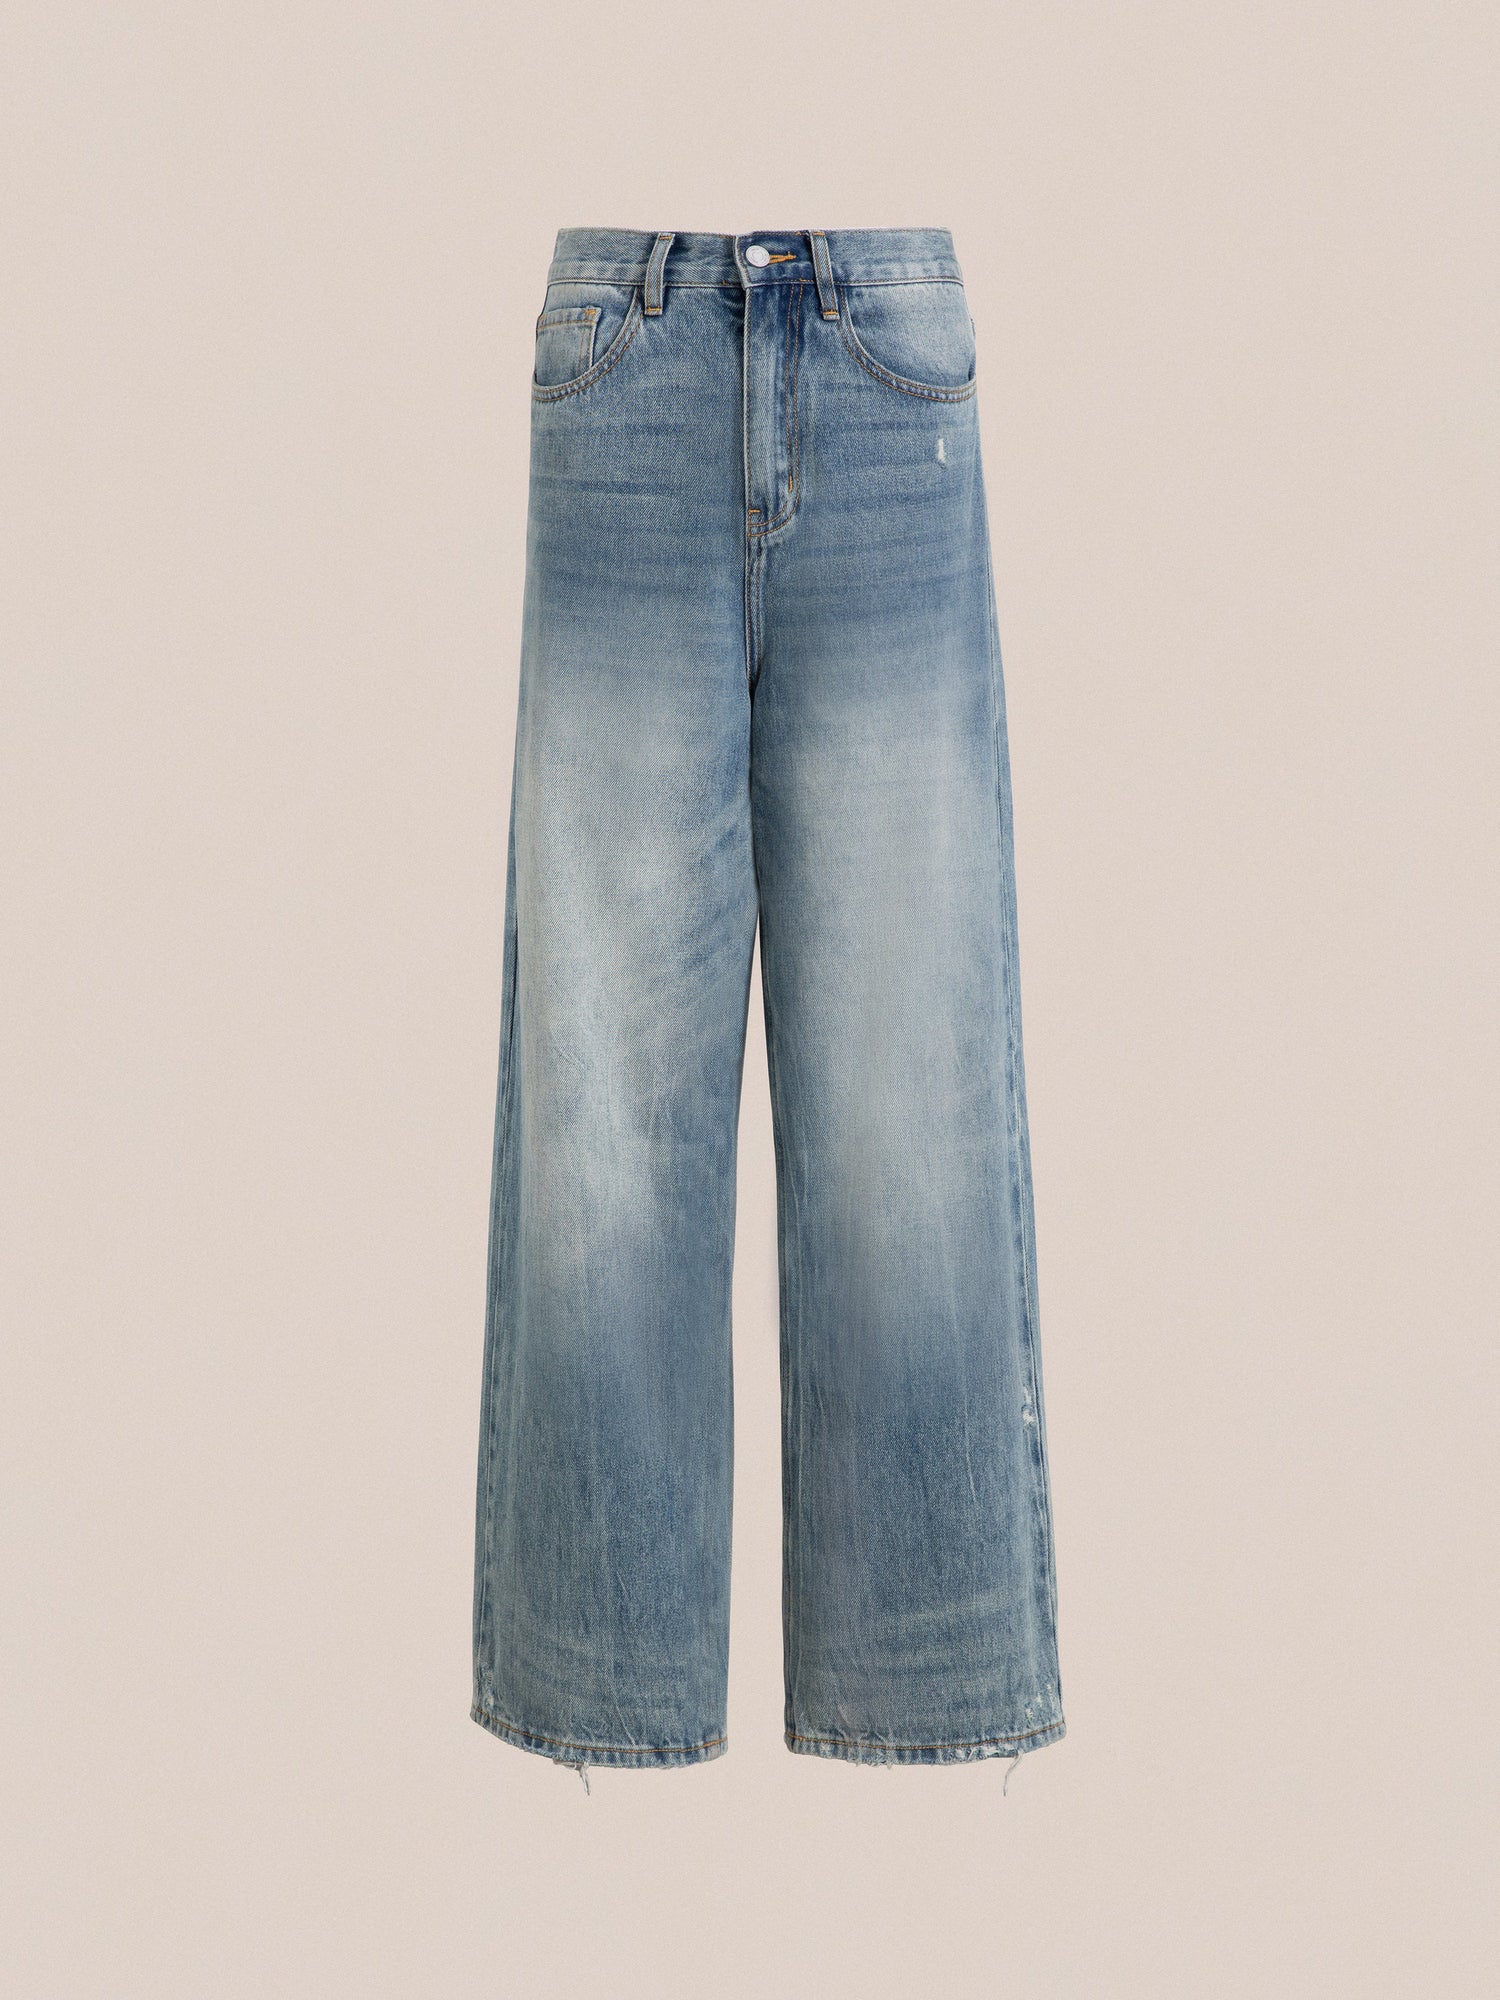 A pair of Found Lacy Baggy Jeans with a vintage blue wash and frayed hems, displayed against a light pink background.